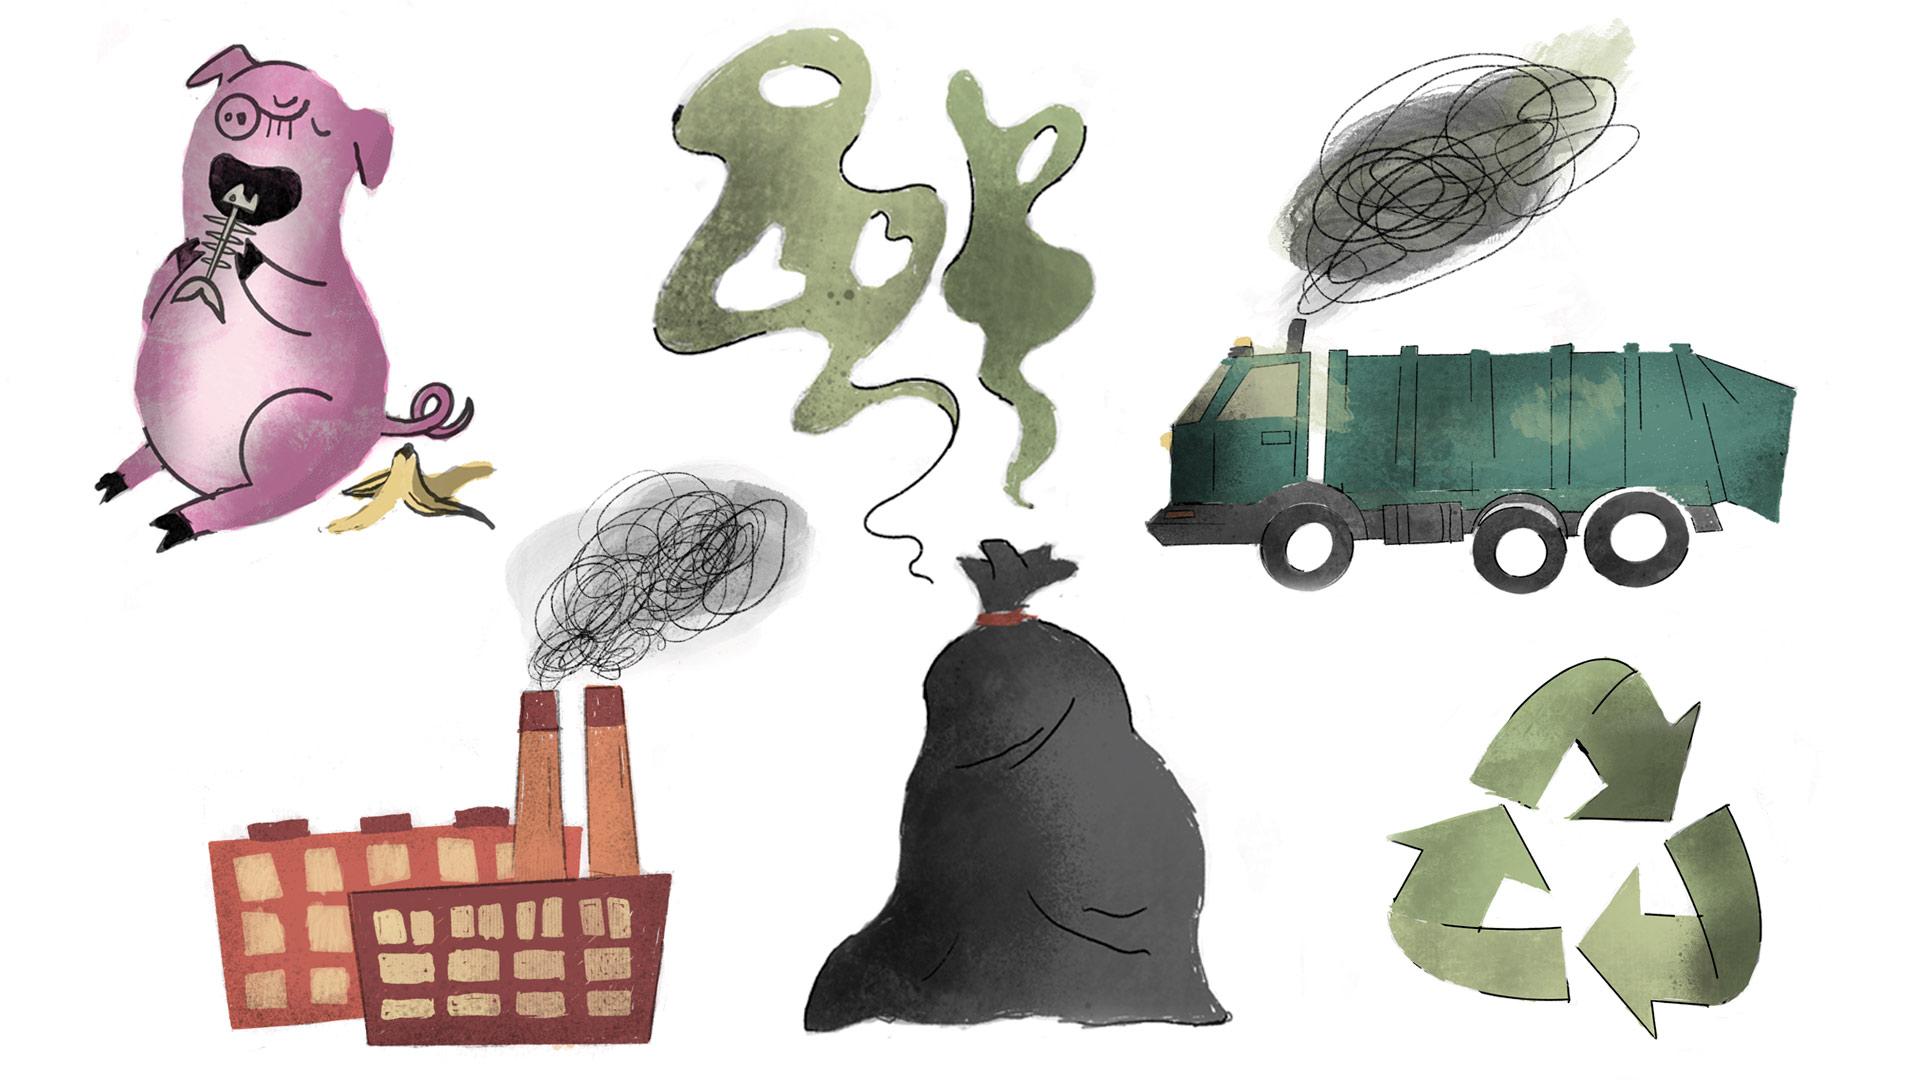 Illustrated images of the waste system including garbage trucks and trash bags. Illustration credits: Jason Keisling.